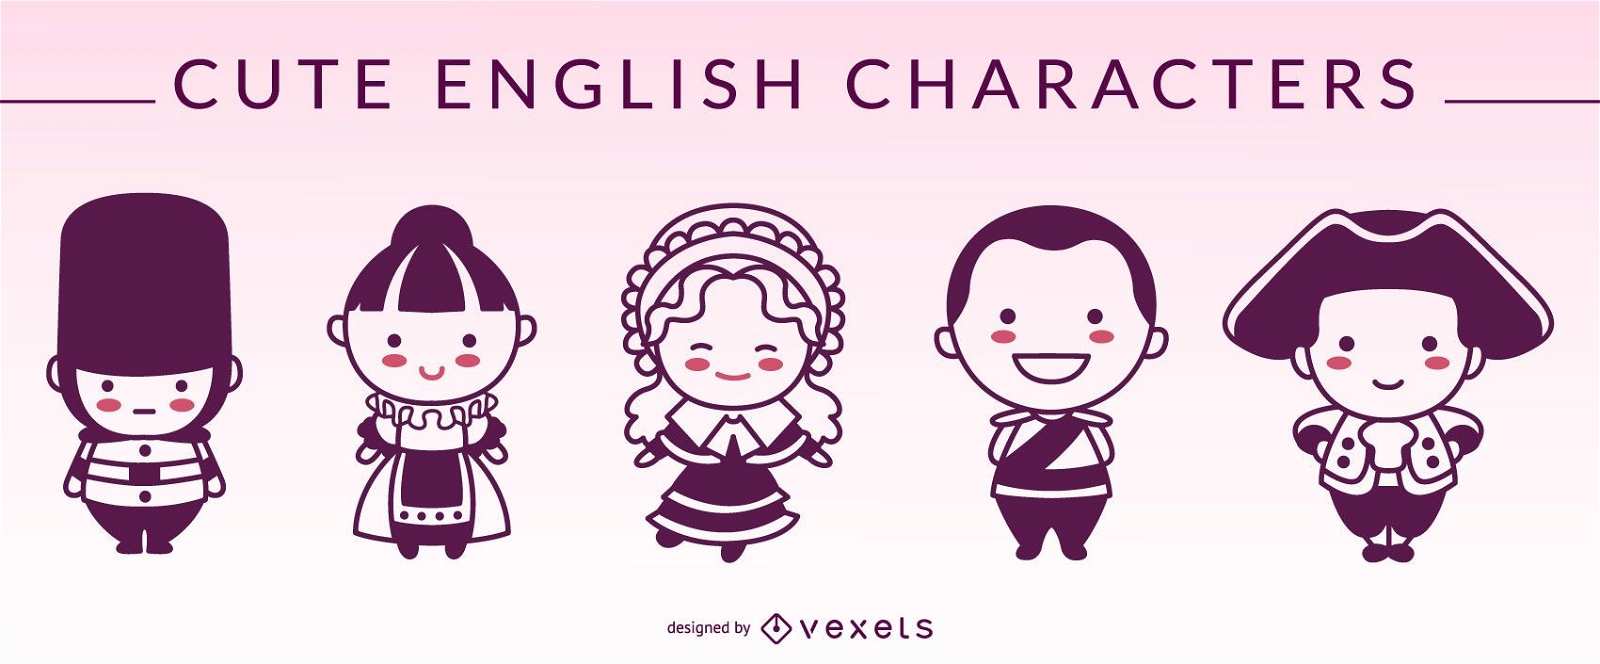 Cute english characters silhouettes